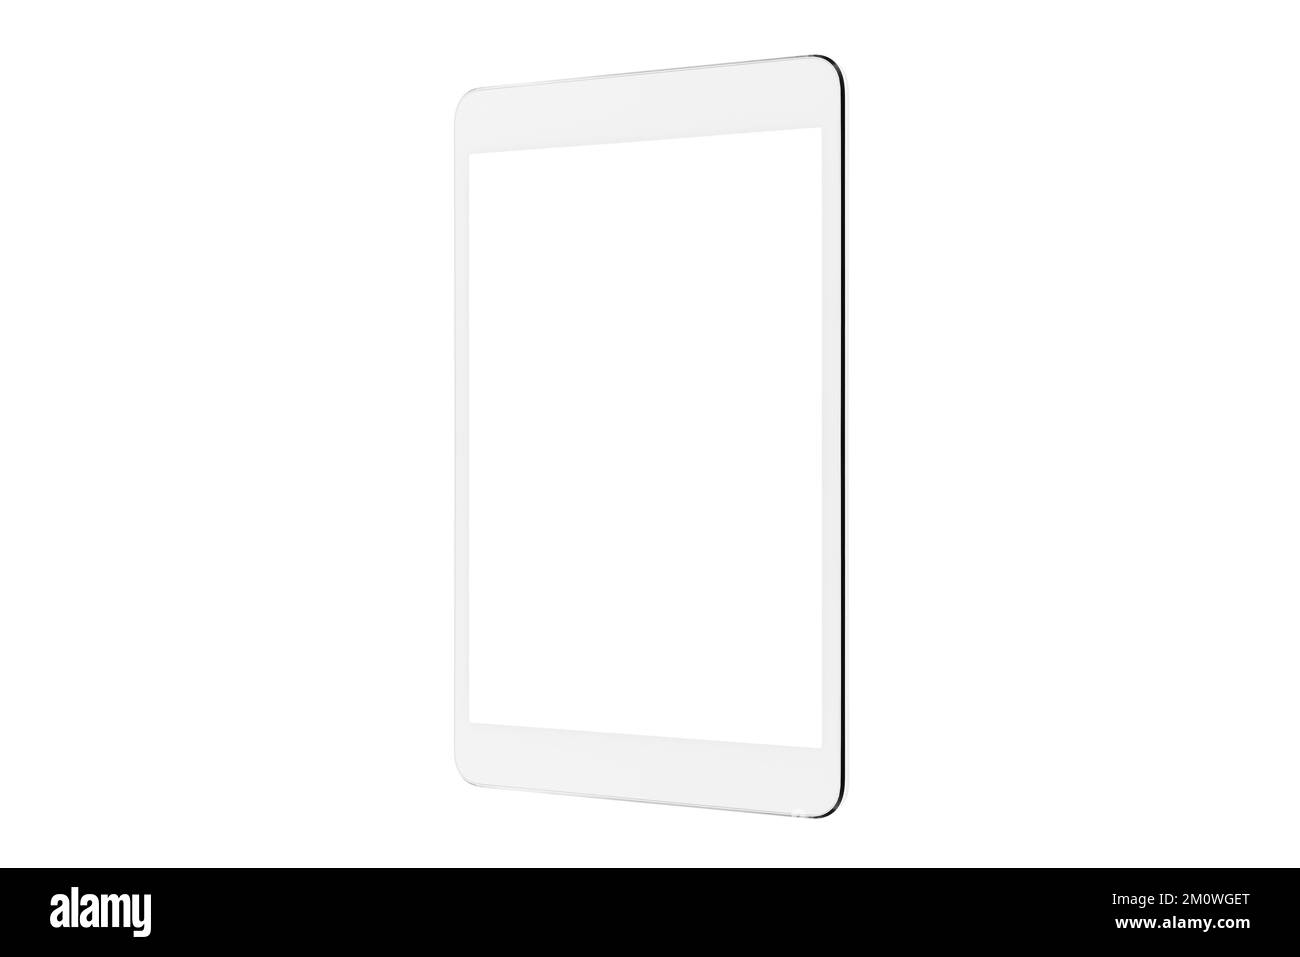 Digital Tablet isolated in three-quarters mockup white background, New Modern Black Frameless Tablet Blank With White Screen Stock Photo